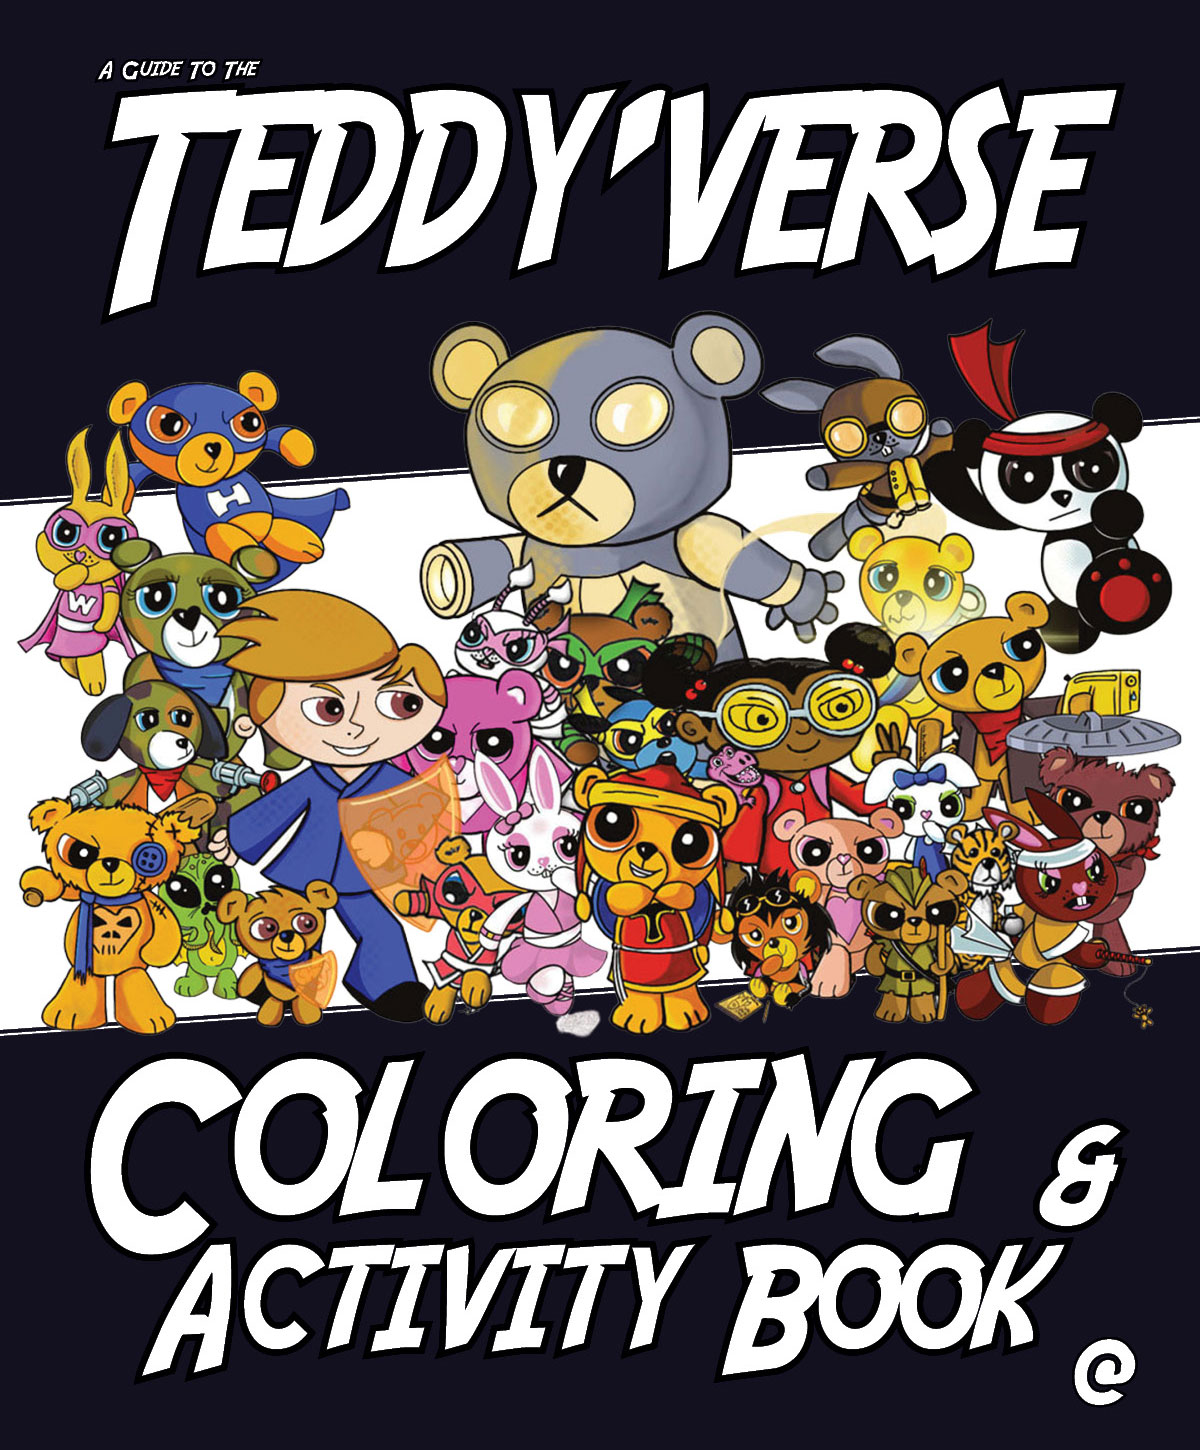 A Guide to the Teddy'verse - a Night Guardian Coloring Book